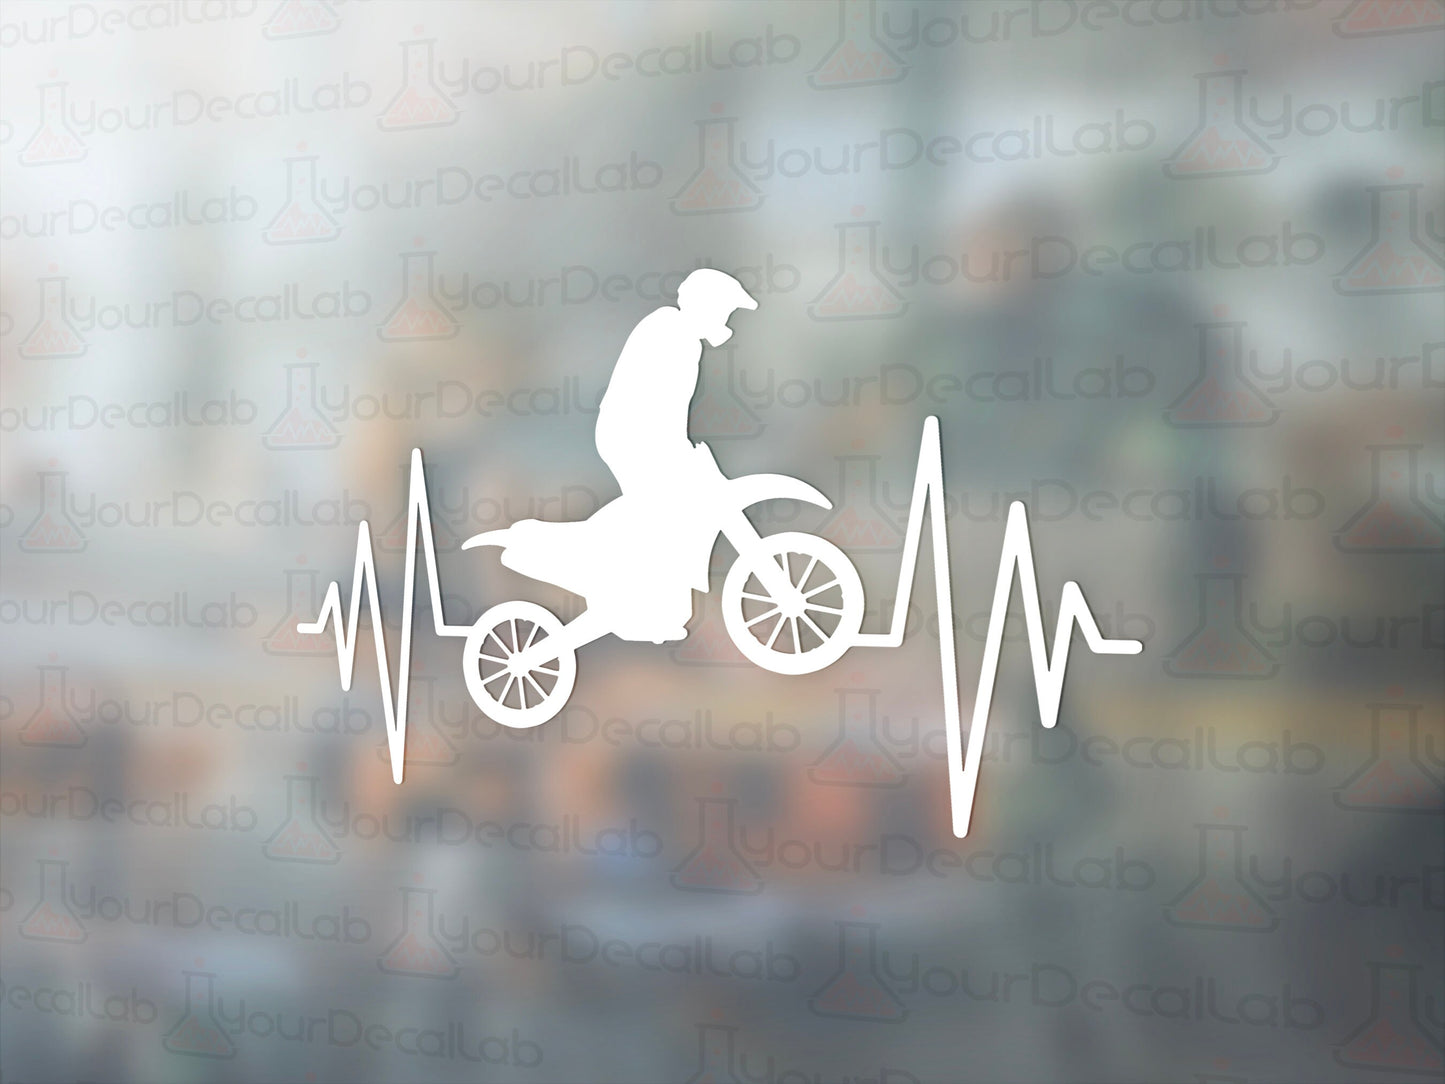 Motocross Heartbeat Decal - Many Colors & Size